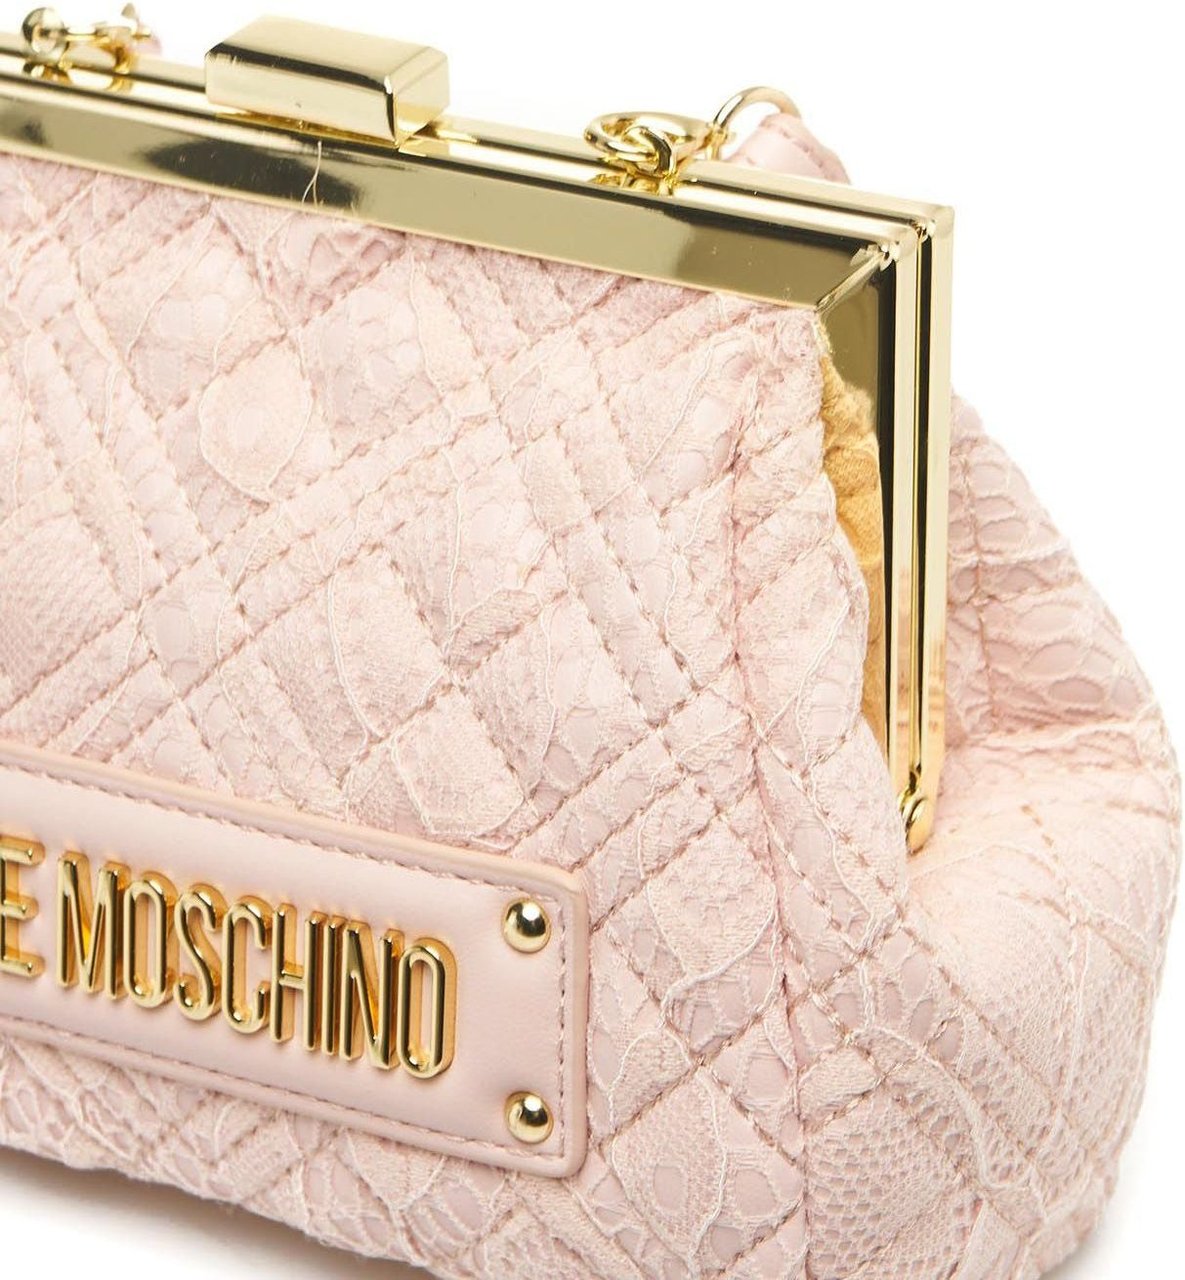 Love Moschino Granny bag with lace insert Roze